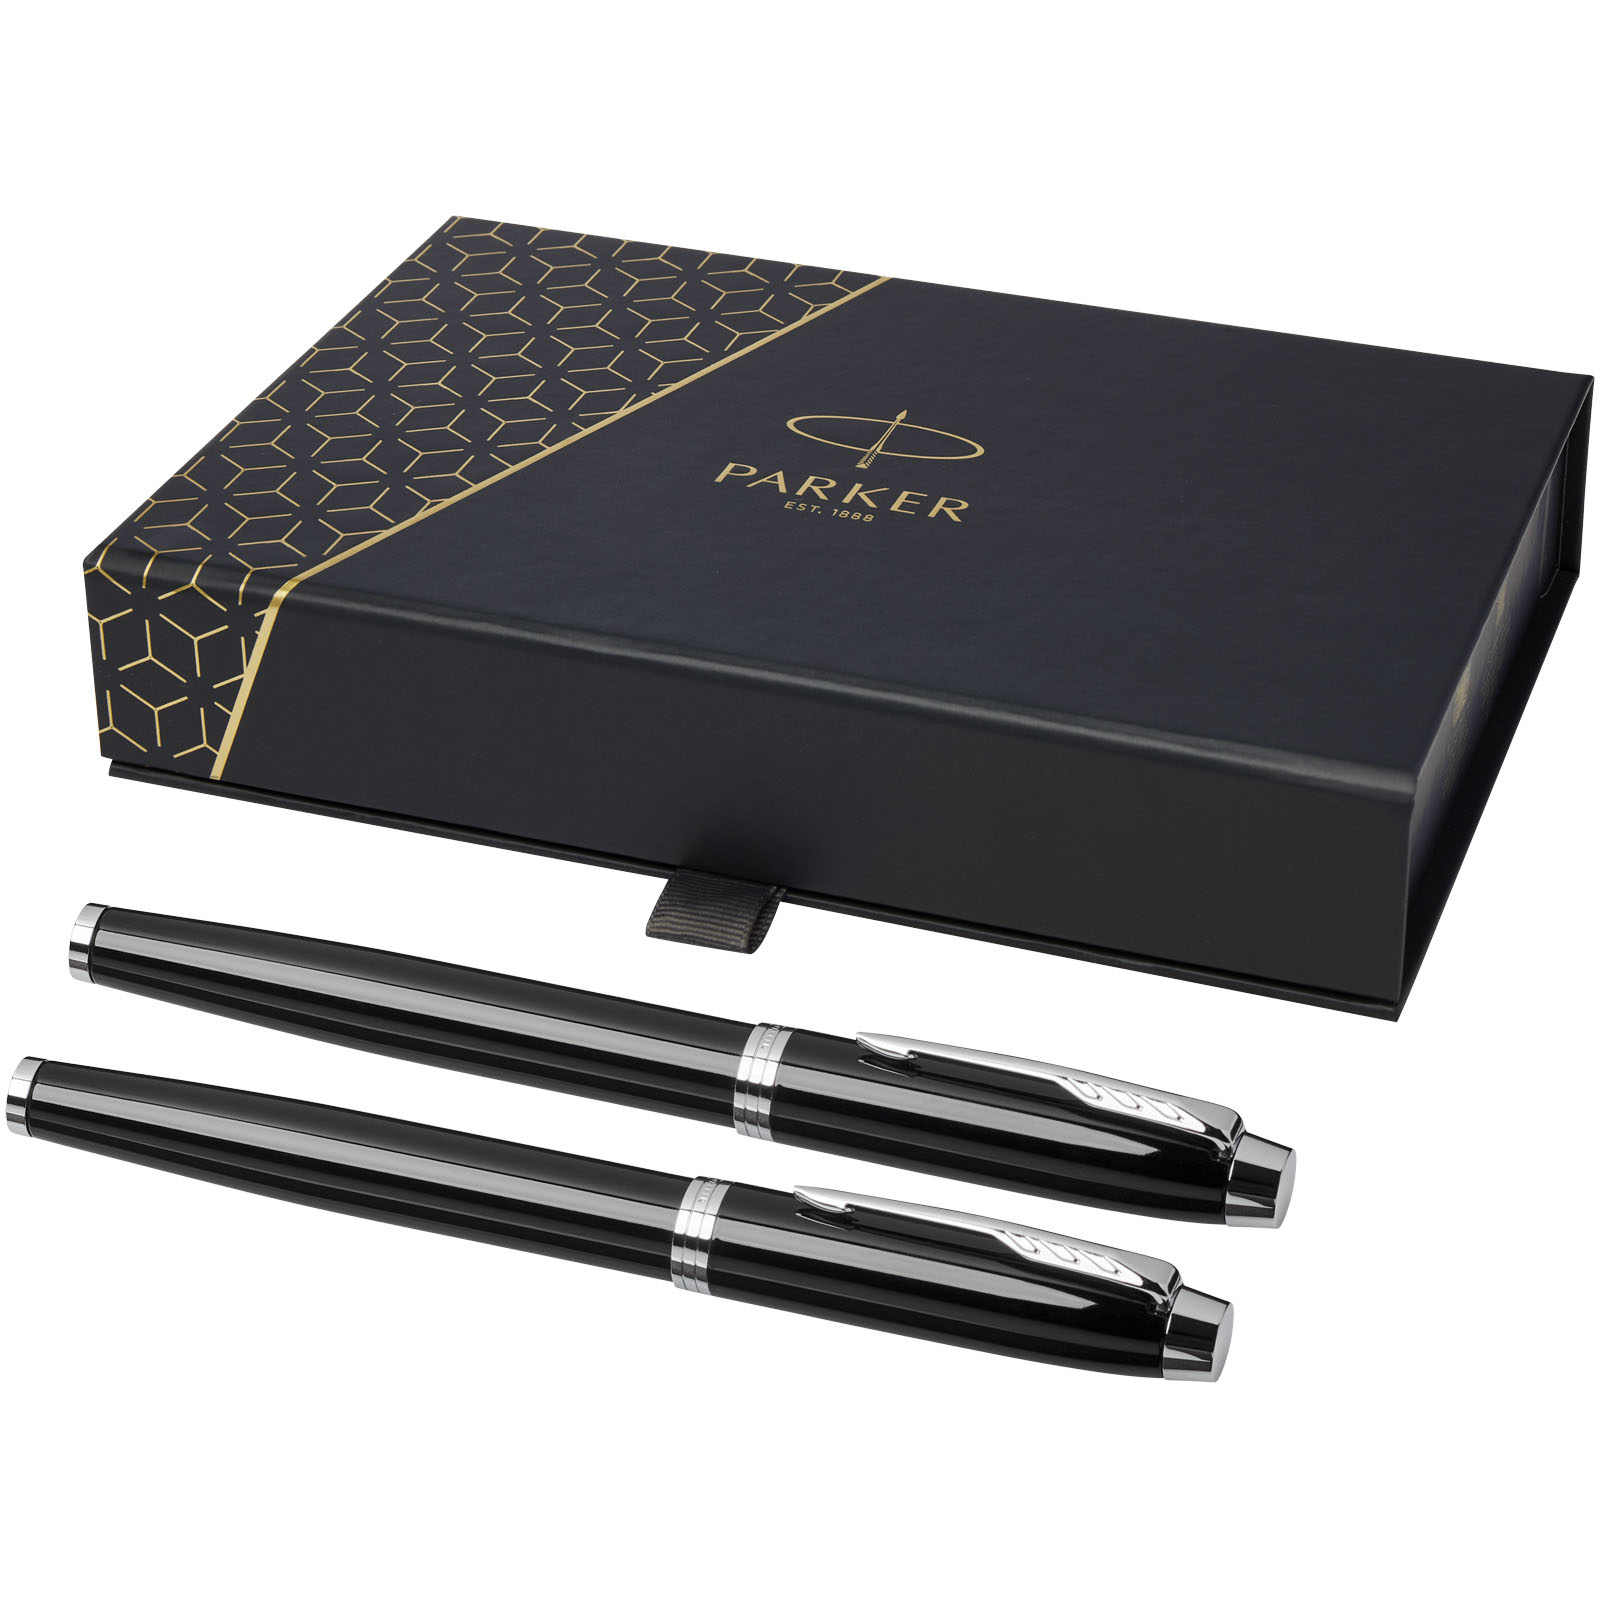 Pens & Writing - Parker IM rollerball and fountain pen set